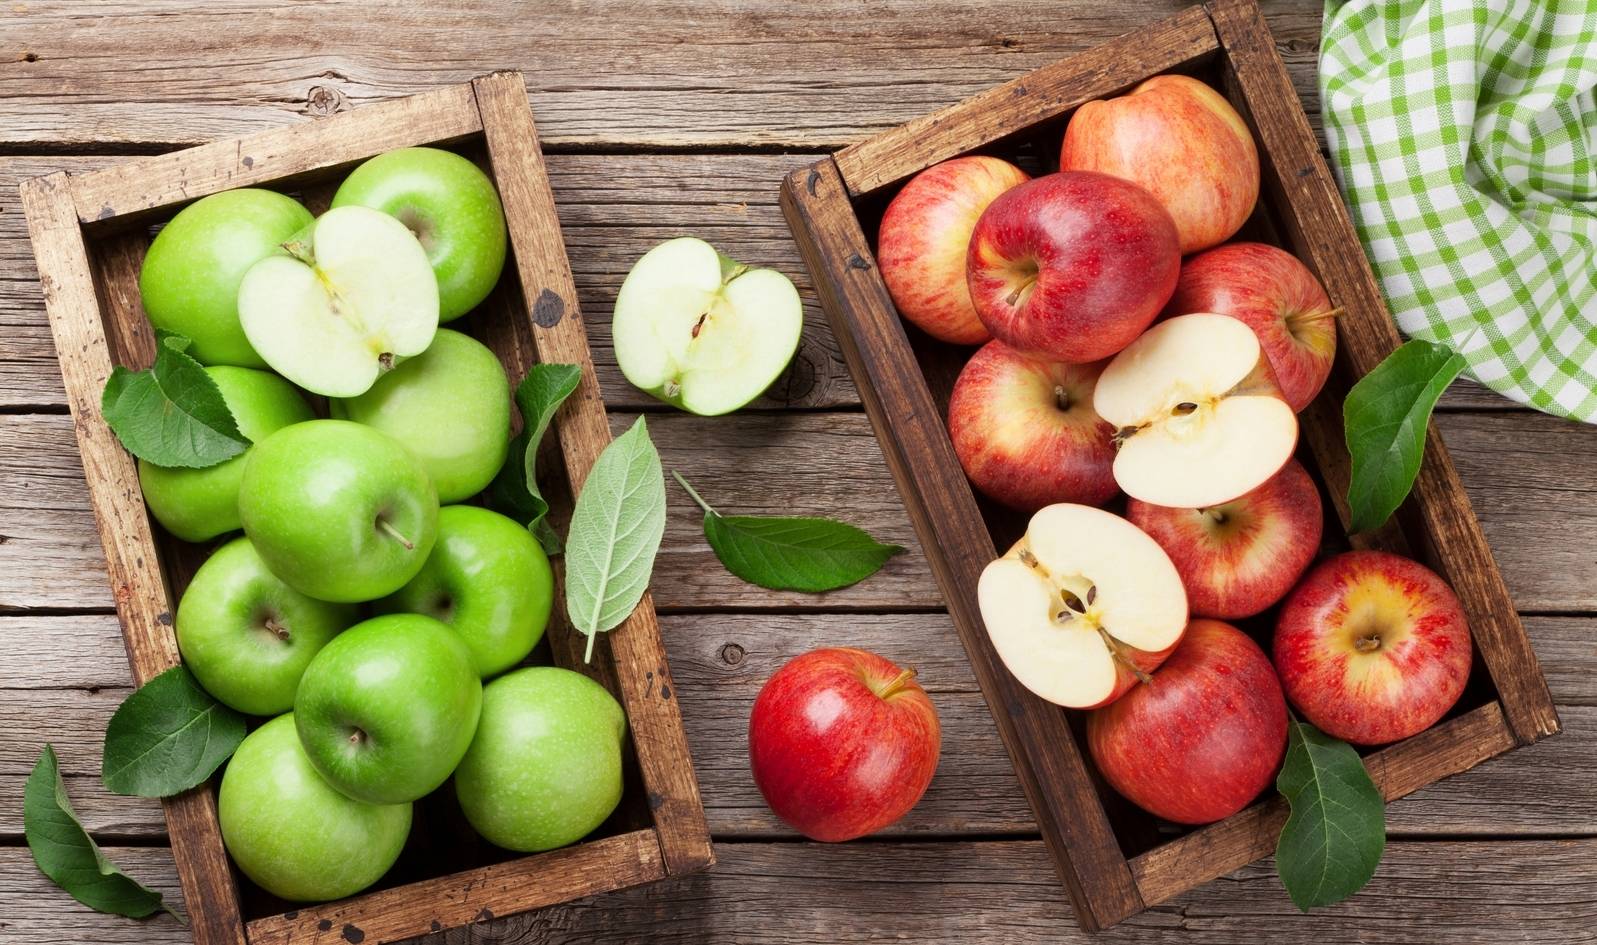 Malic Acid comes from Apples used in skincare products